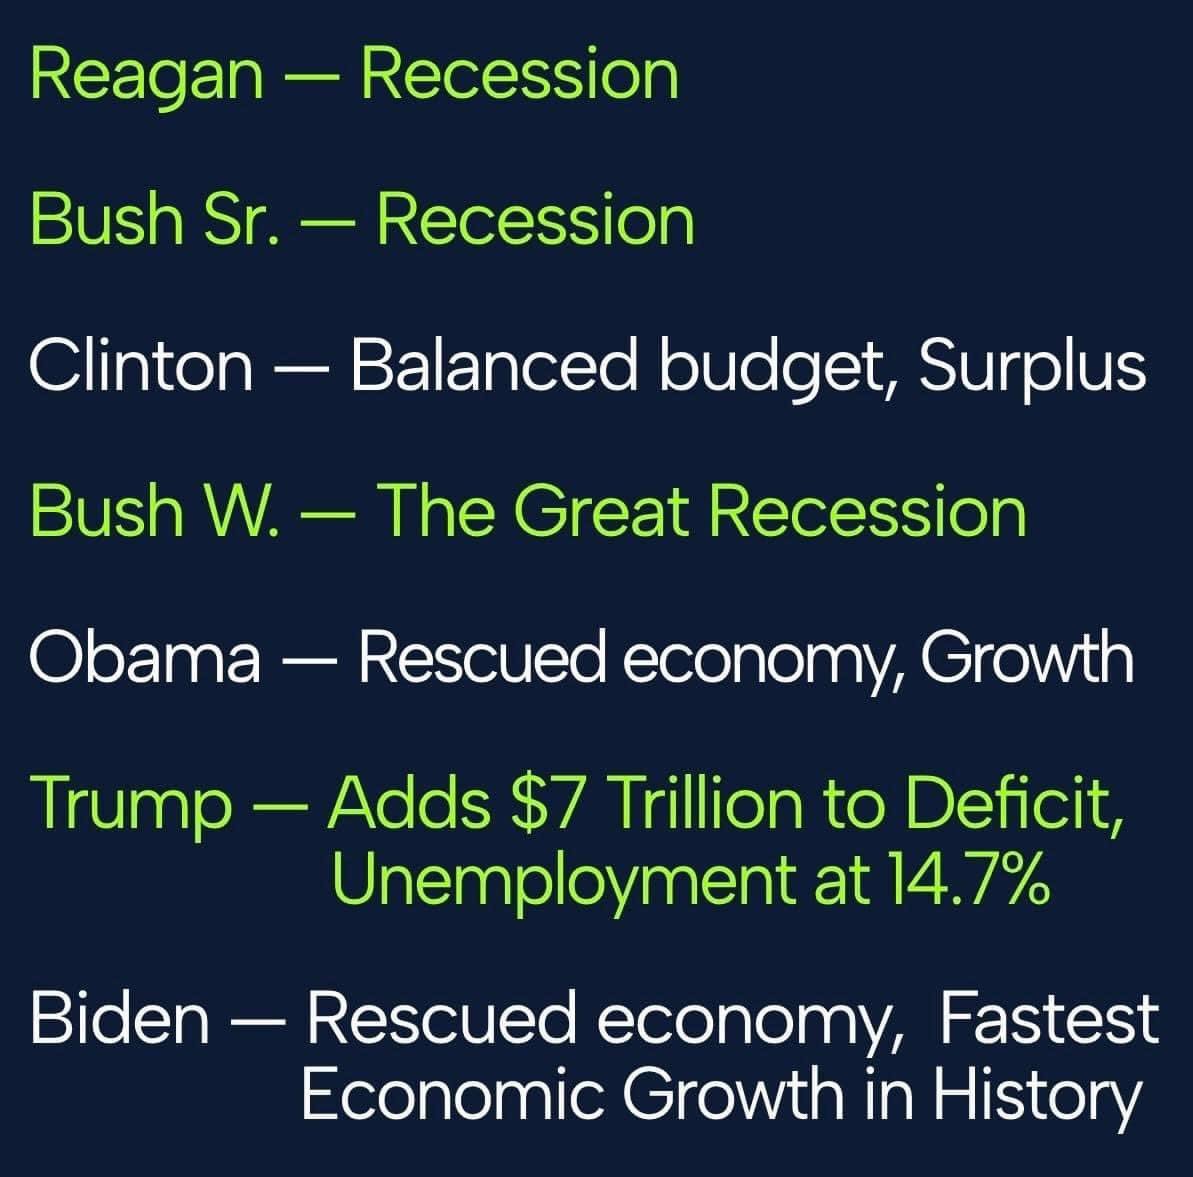 Good morning and Happy Friday to everyone who knows that Republican Presidents always step in and mess up the economy; Democratic Presidents come in and FIX it.

Say it with me: 
Democrats are BETTER for the economy.